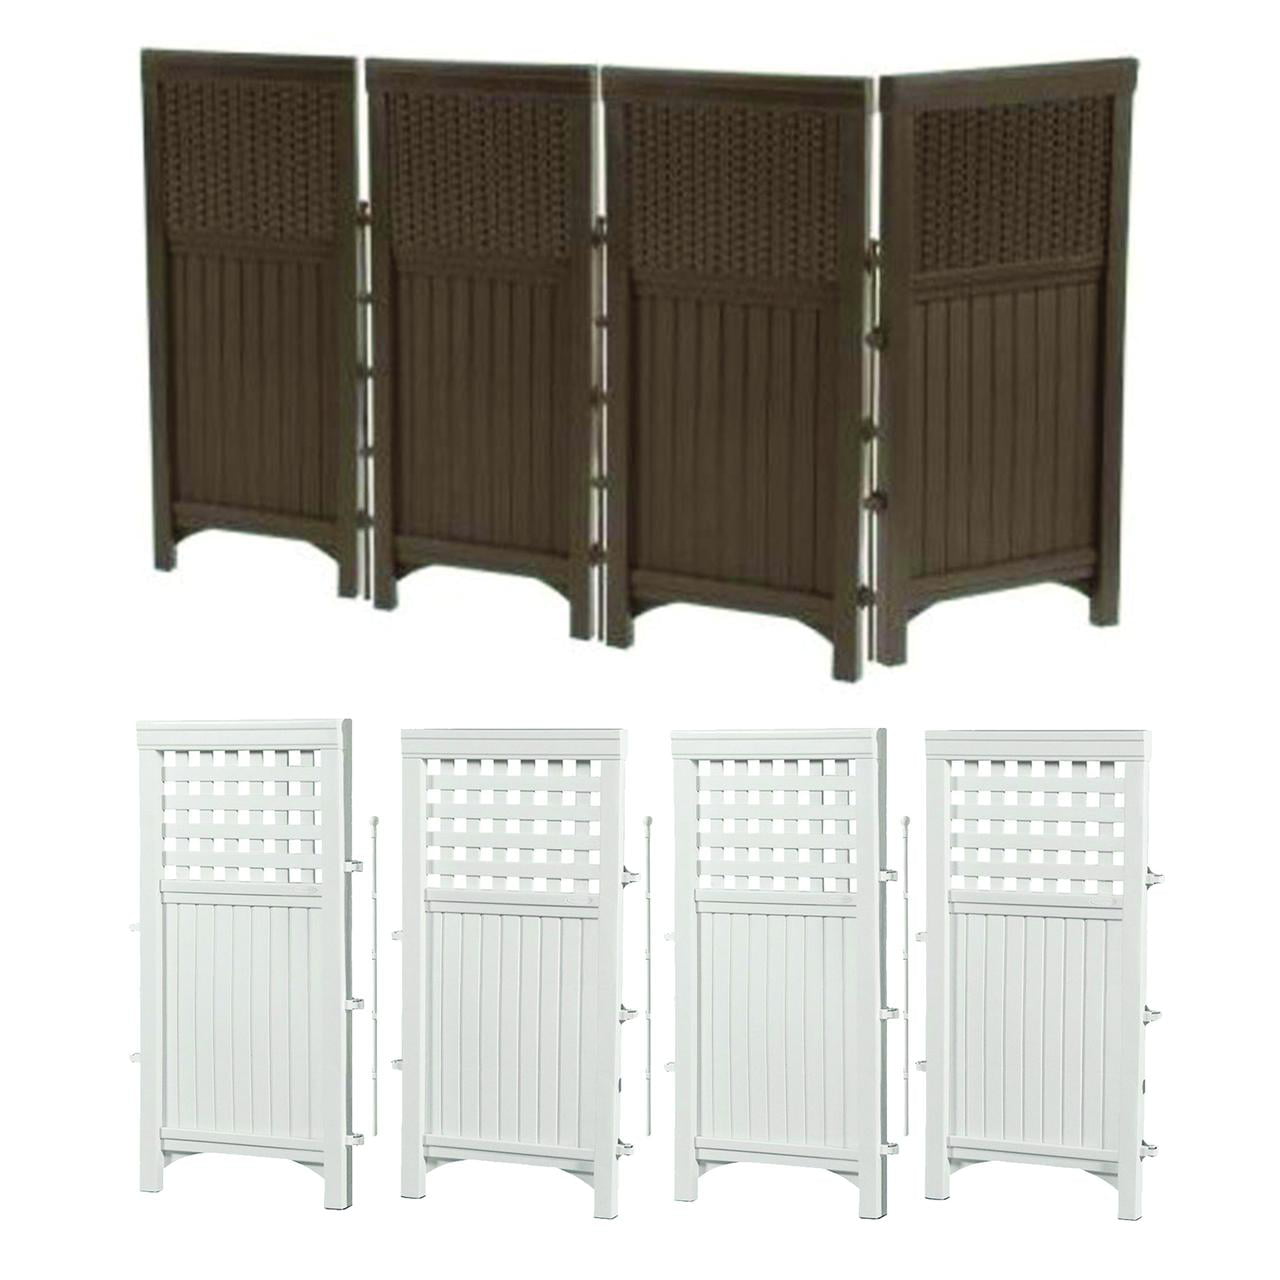 Suncast Outdoor Garden Yard 4 Panel Screen Enclosure Gated Fence Used White 